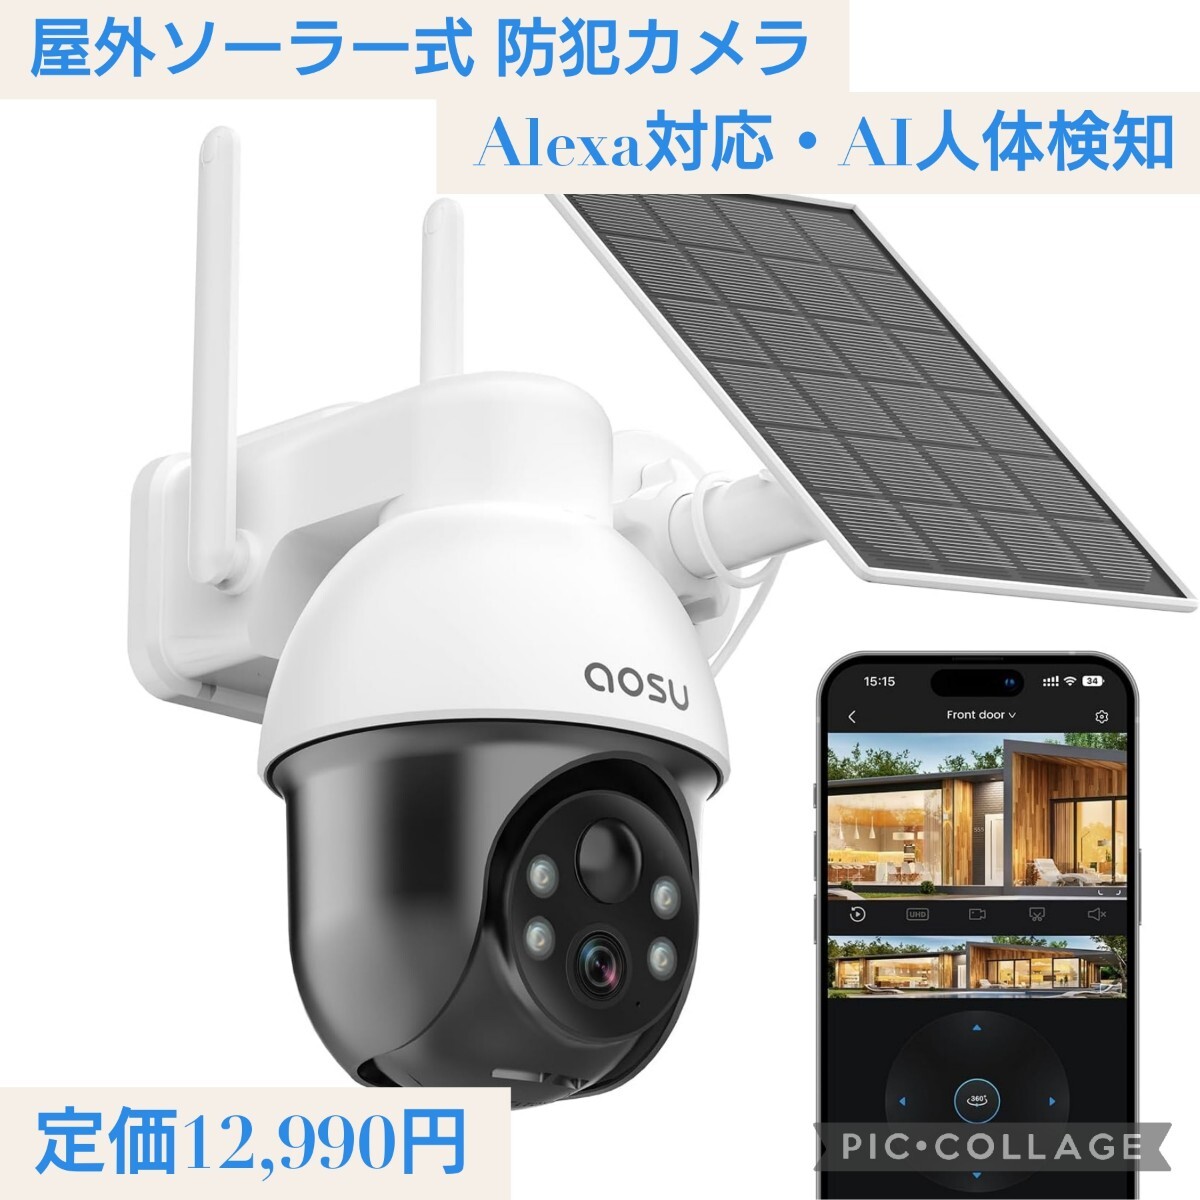  new goods * regular price 12,990 jpy Alexa correspondence AI human body detection outdoors solar type security camera wireless 360° automatic . tail 500 ten thousand super height pixel 2.4Gwifi interactive sound telephone call 